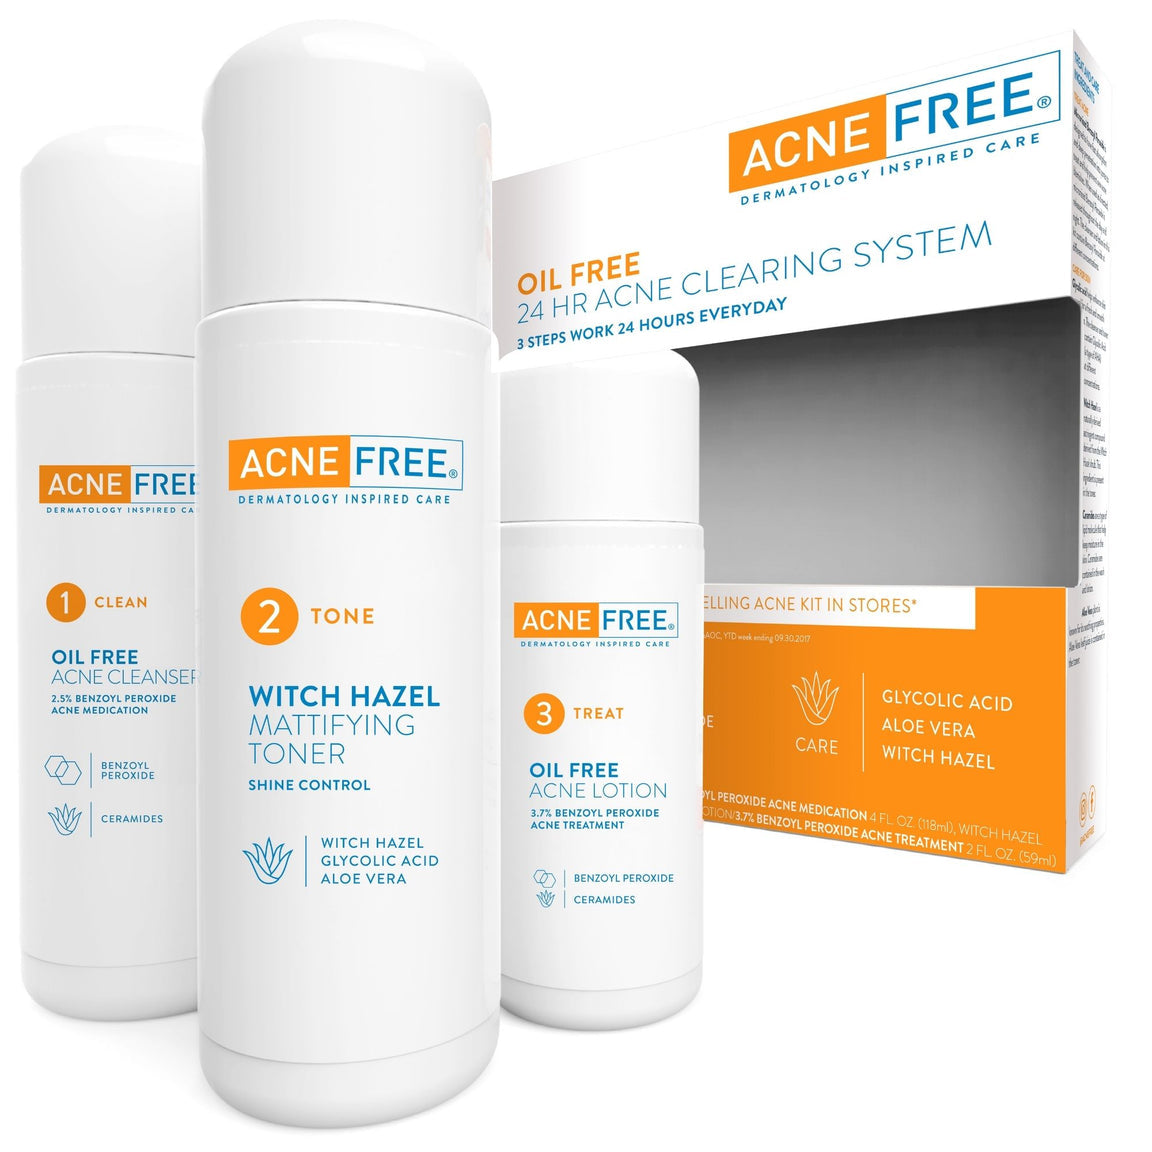 ACNE FREE Ool Free 24 HR Acne Clearing System 3 Steps Work 24 Hours Every Day